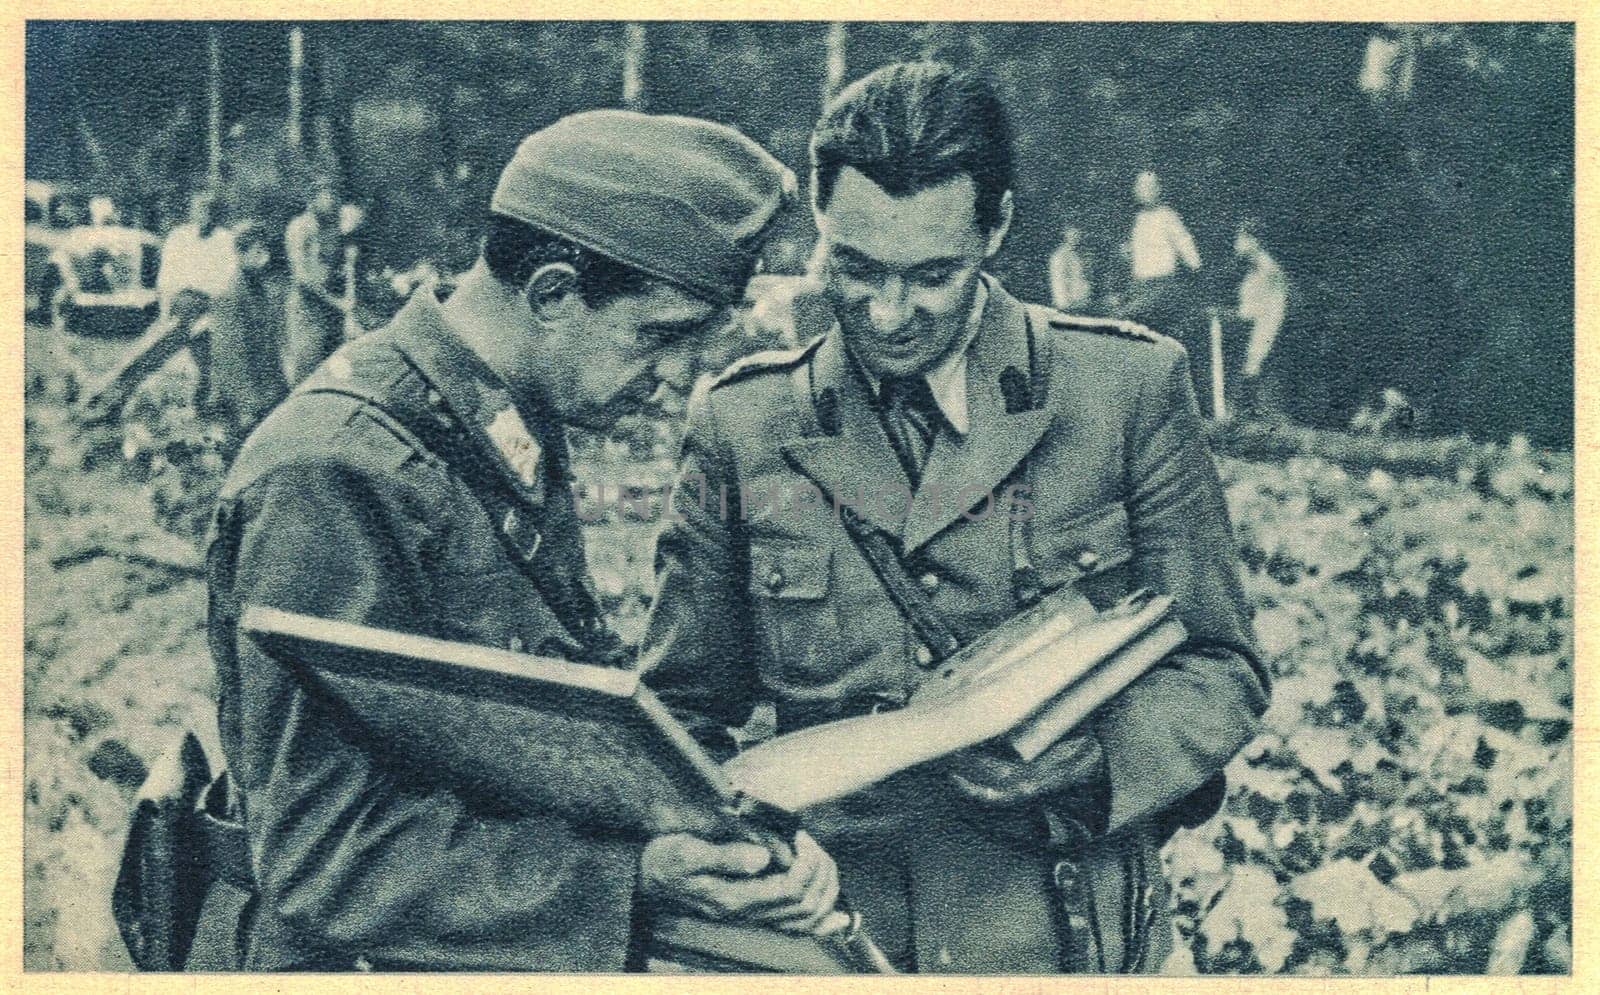 Hungarian and Romanian officers have a conversation. World War 2. by roman_nerud